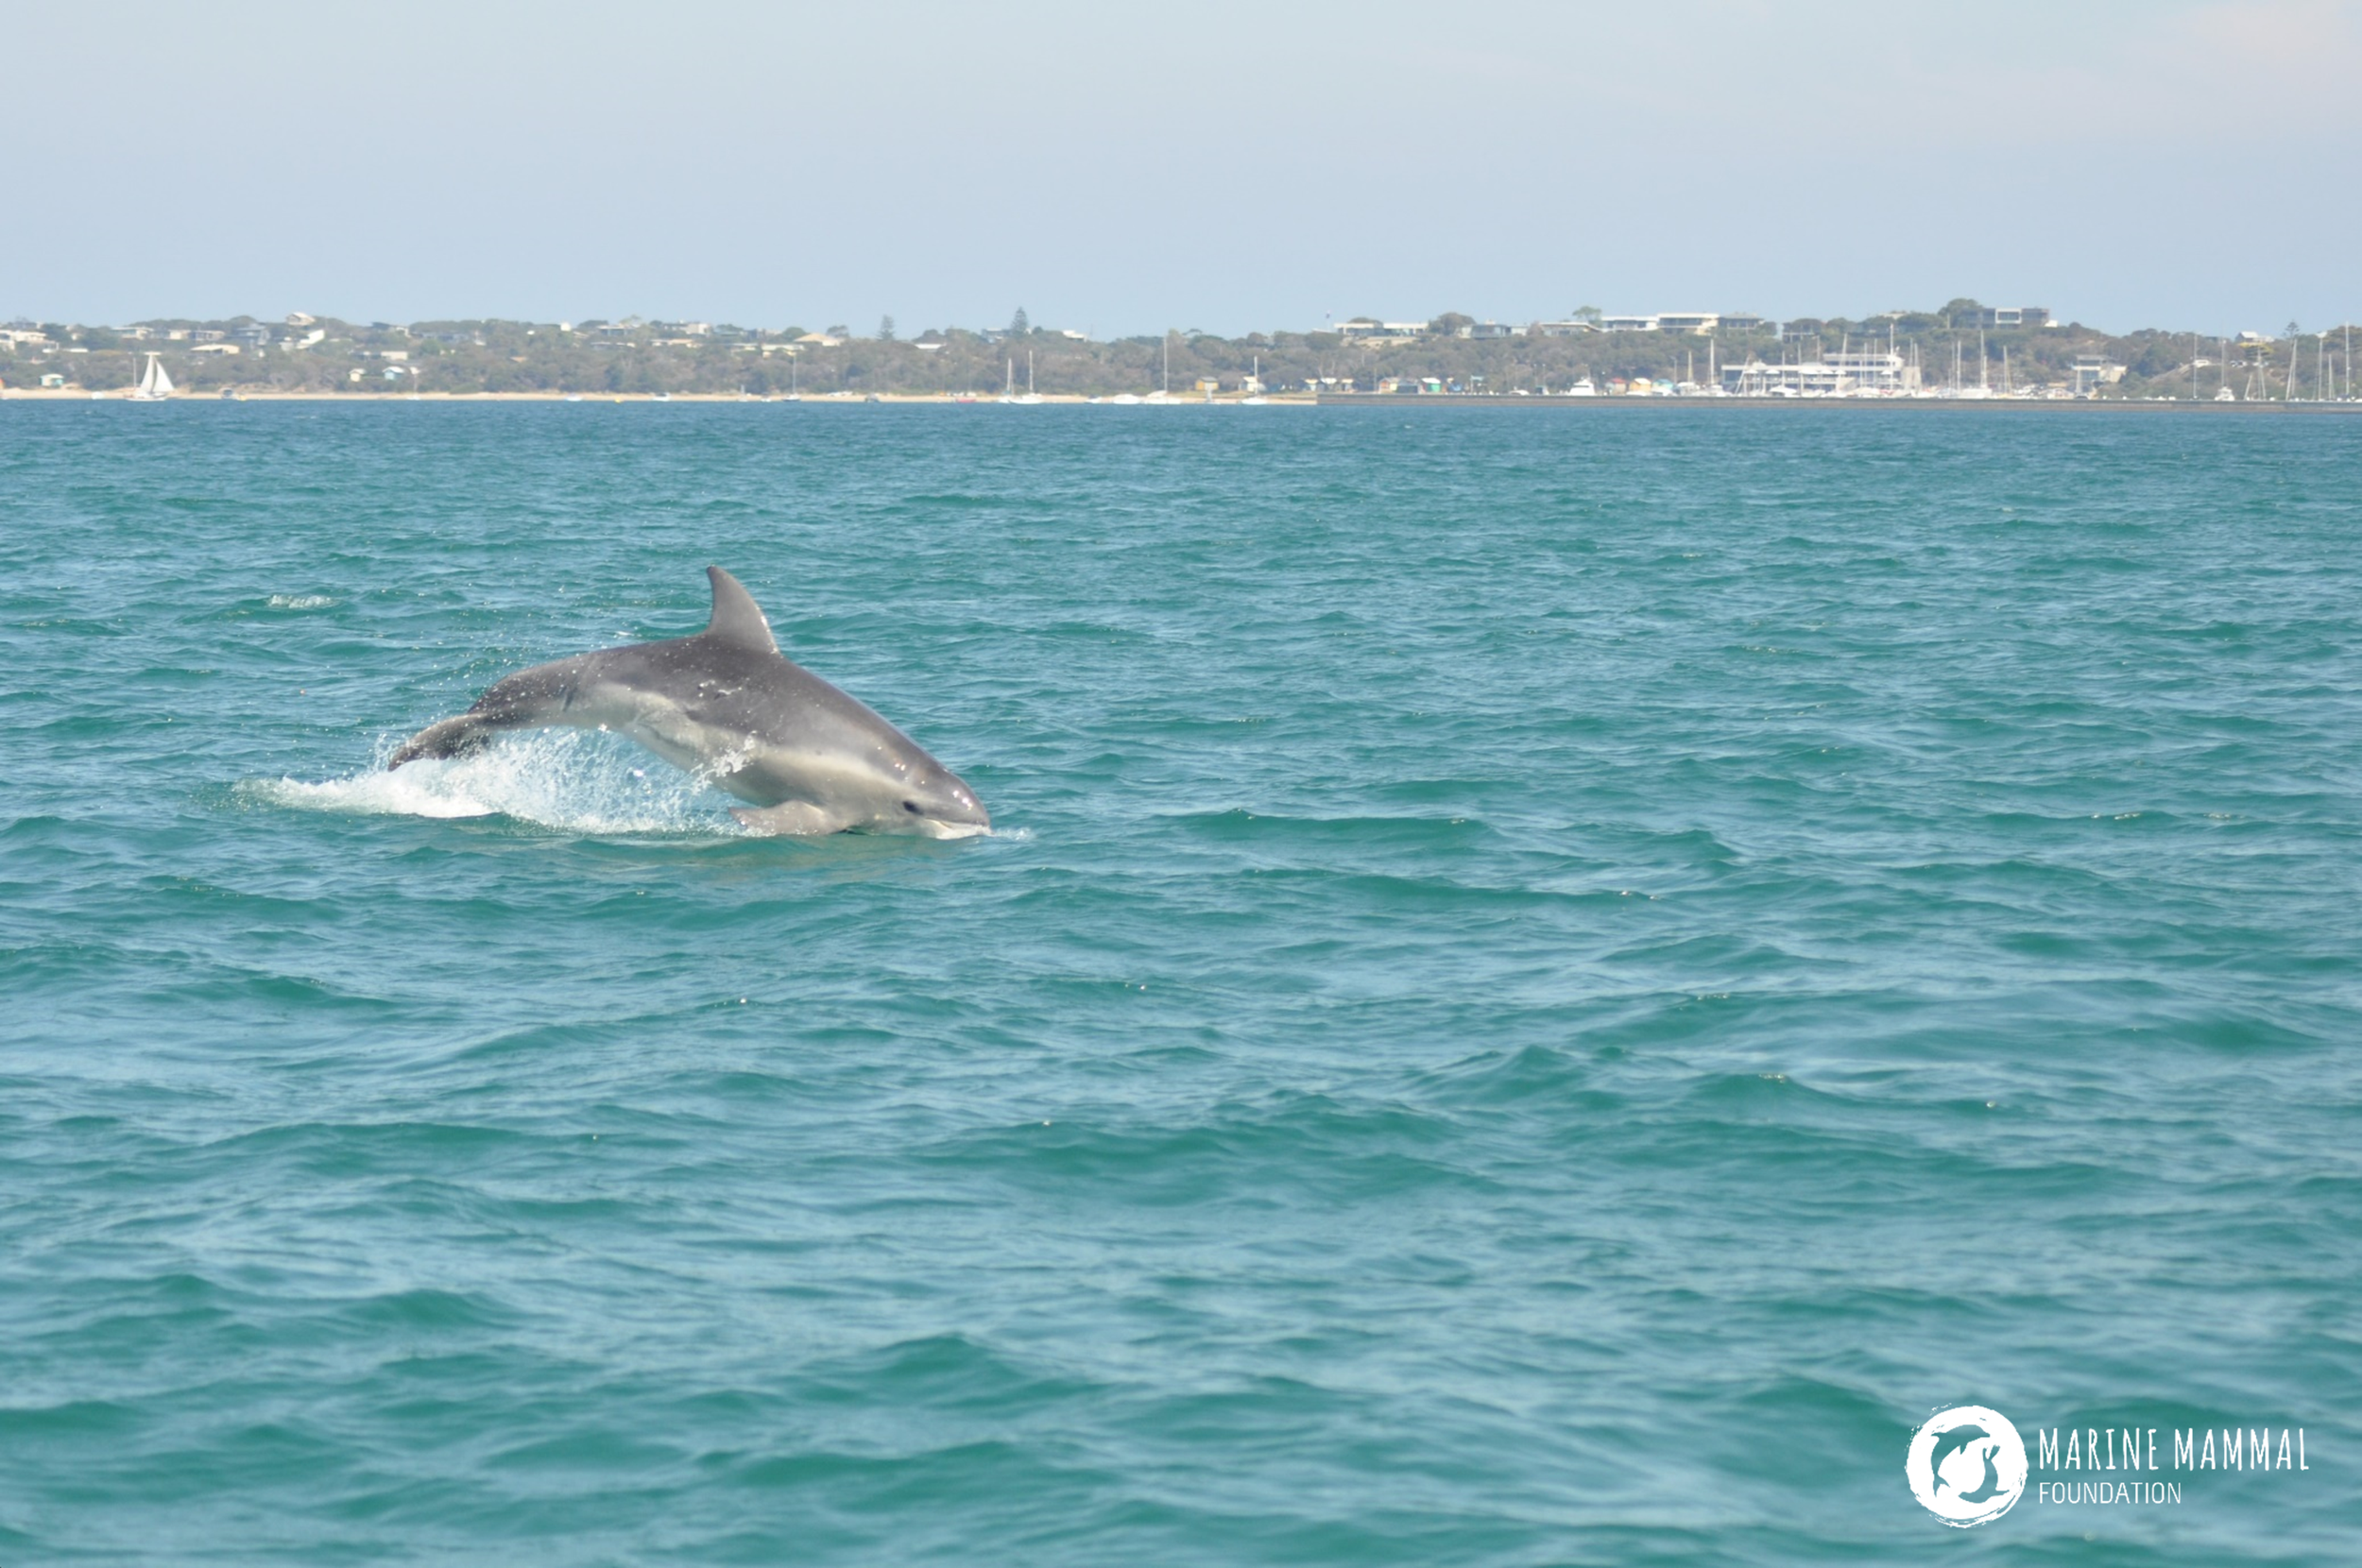 Burrunan dolphins can be found all over Port Phillip Bay